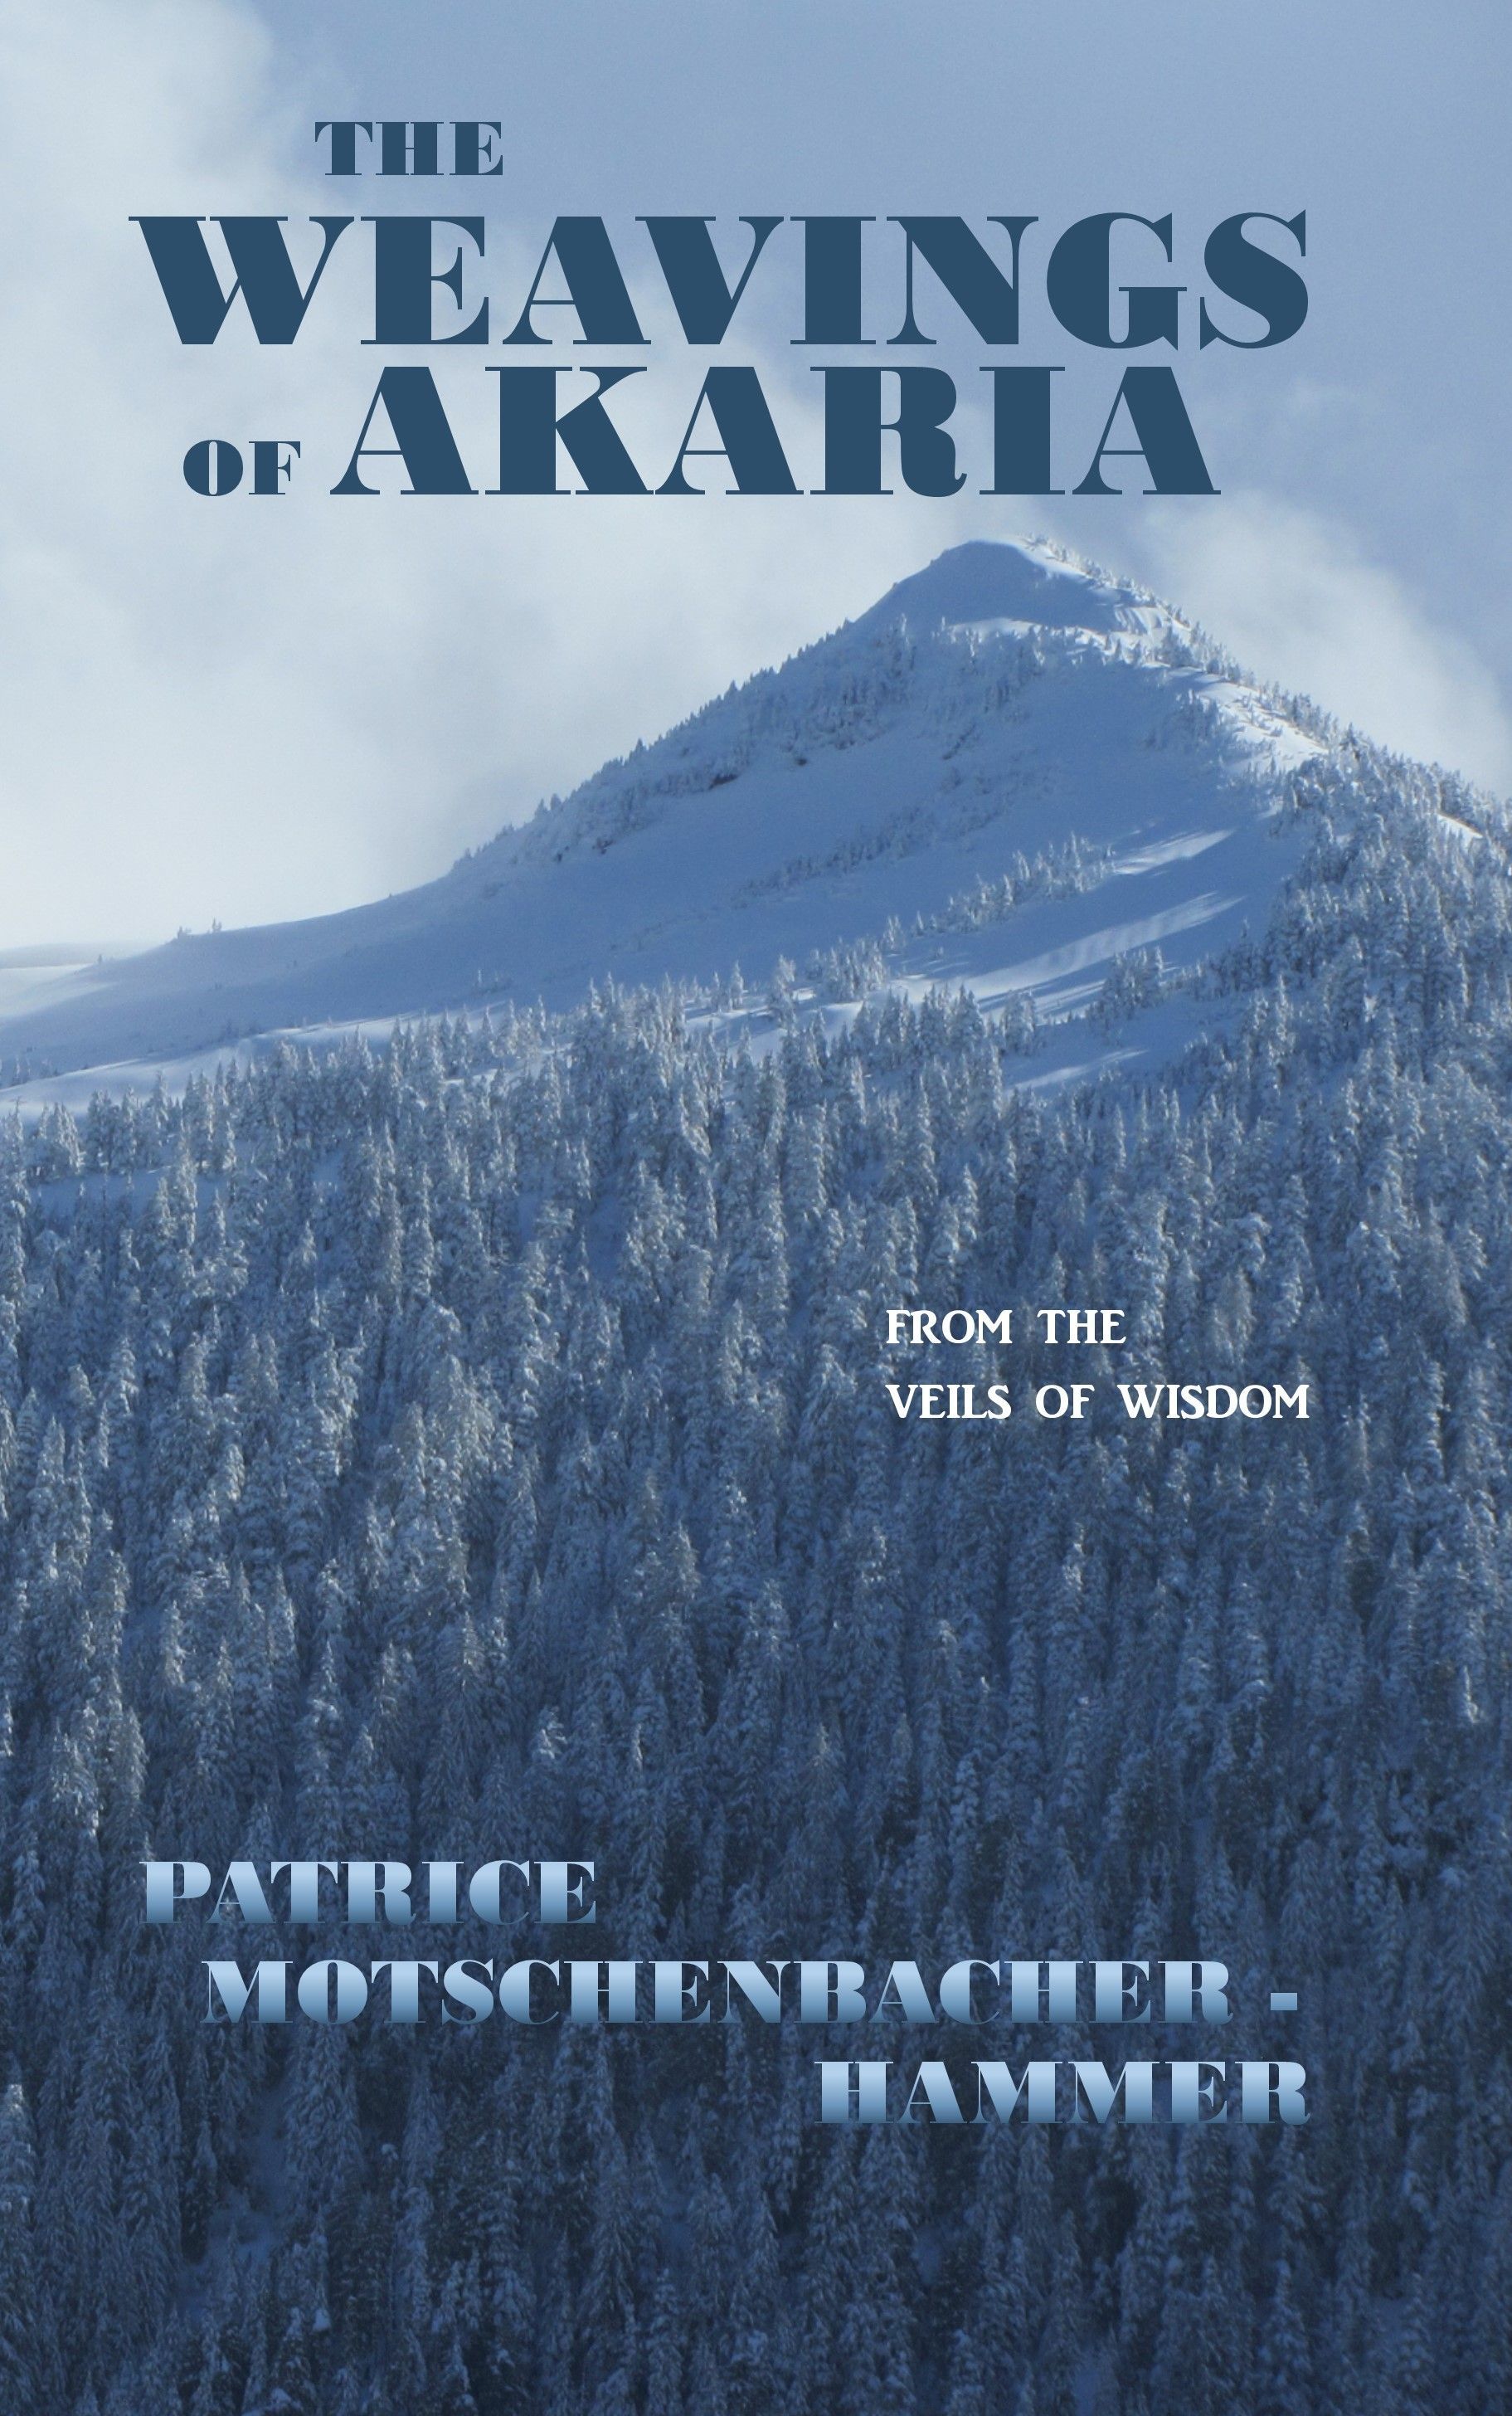 Learn more and purchase "The Weavings of Akaria"